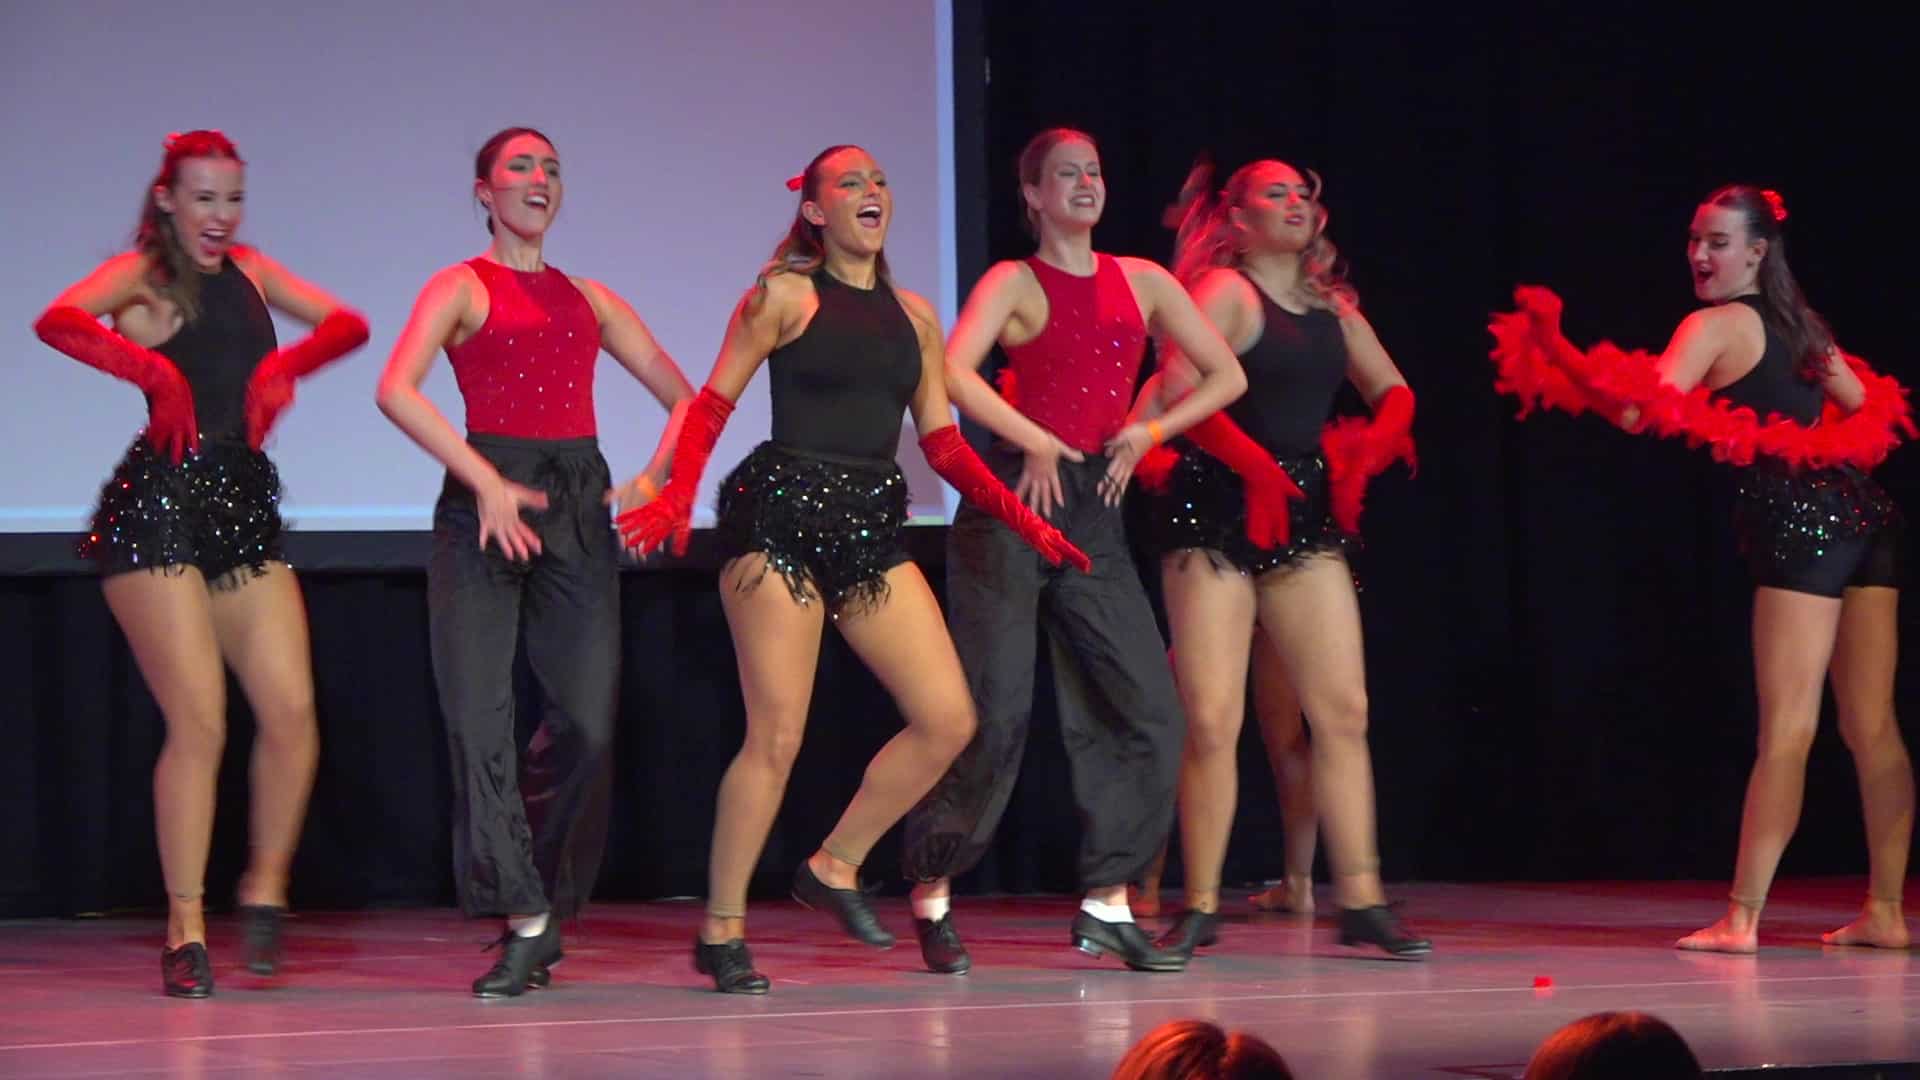 Event Live Streaming – The University of Liverpool Dance Society’s Annual Competition 2023